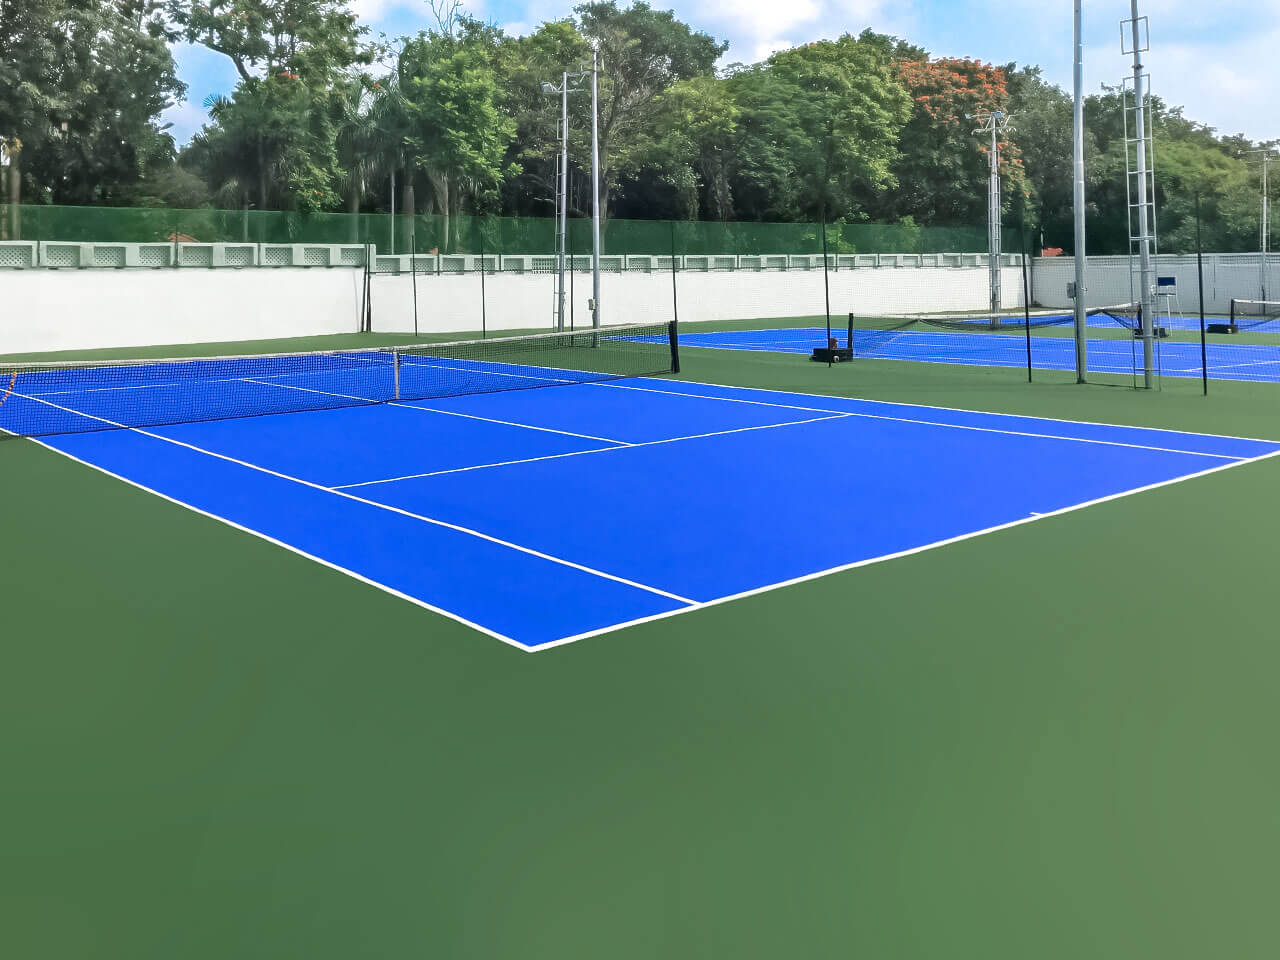 Tennis court approved by ITF